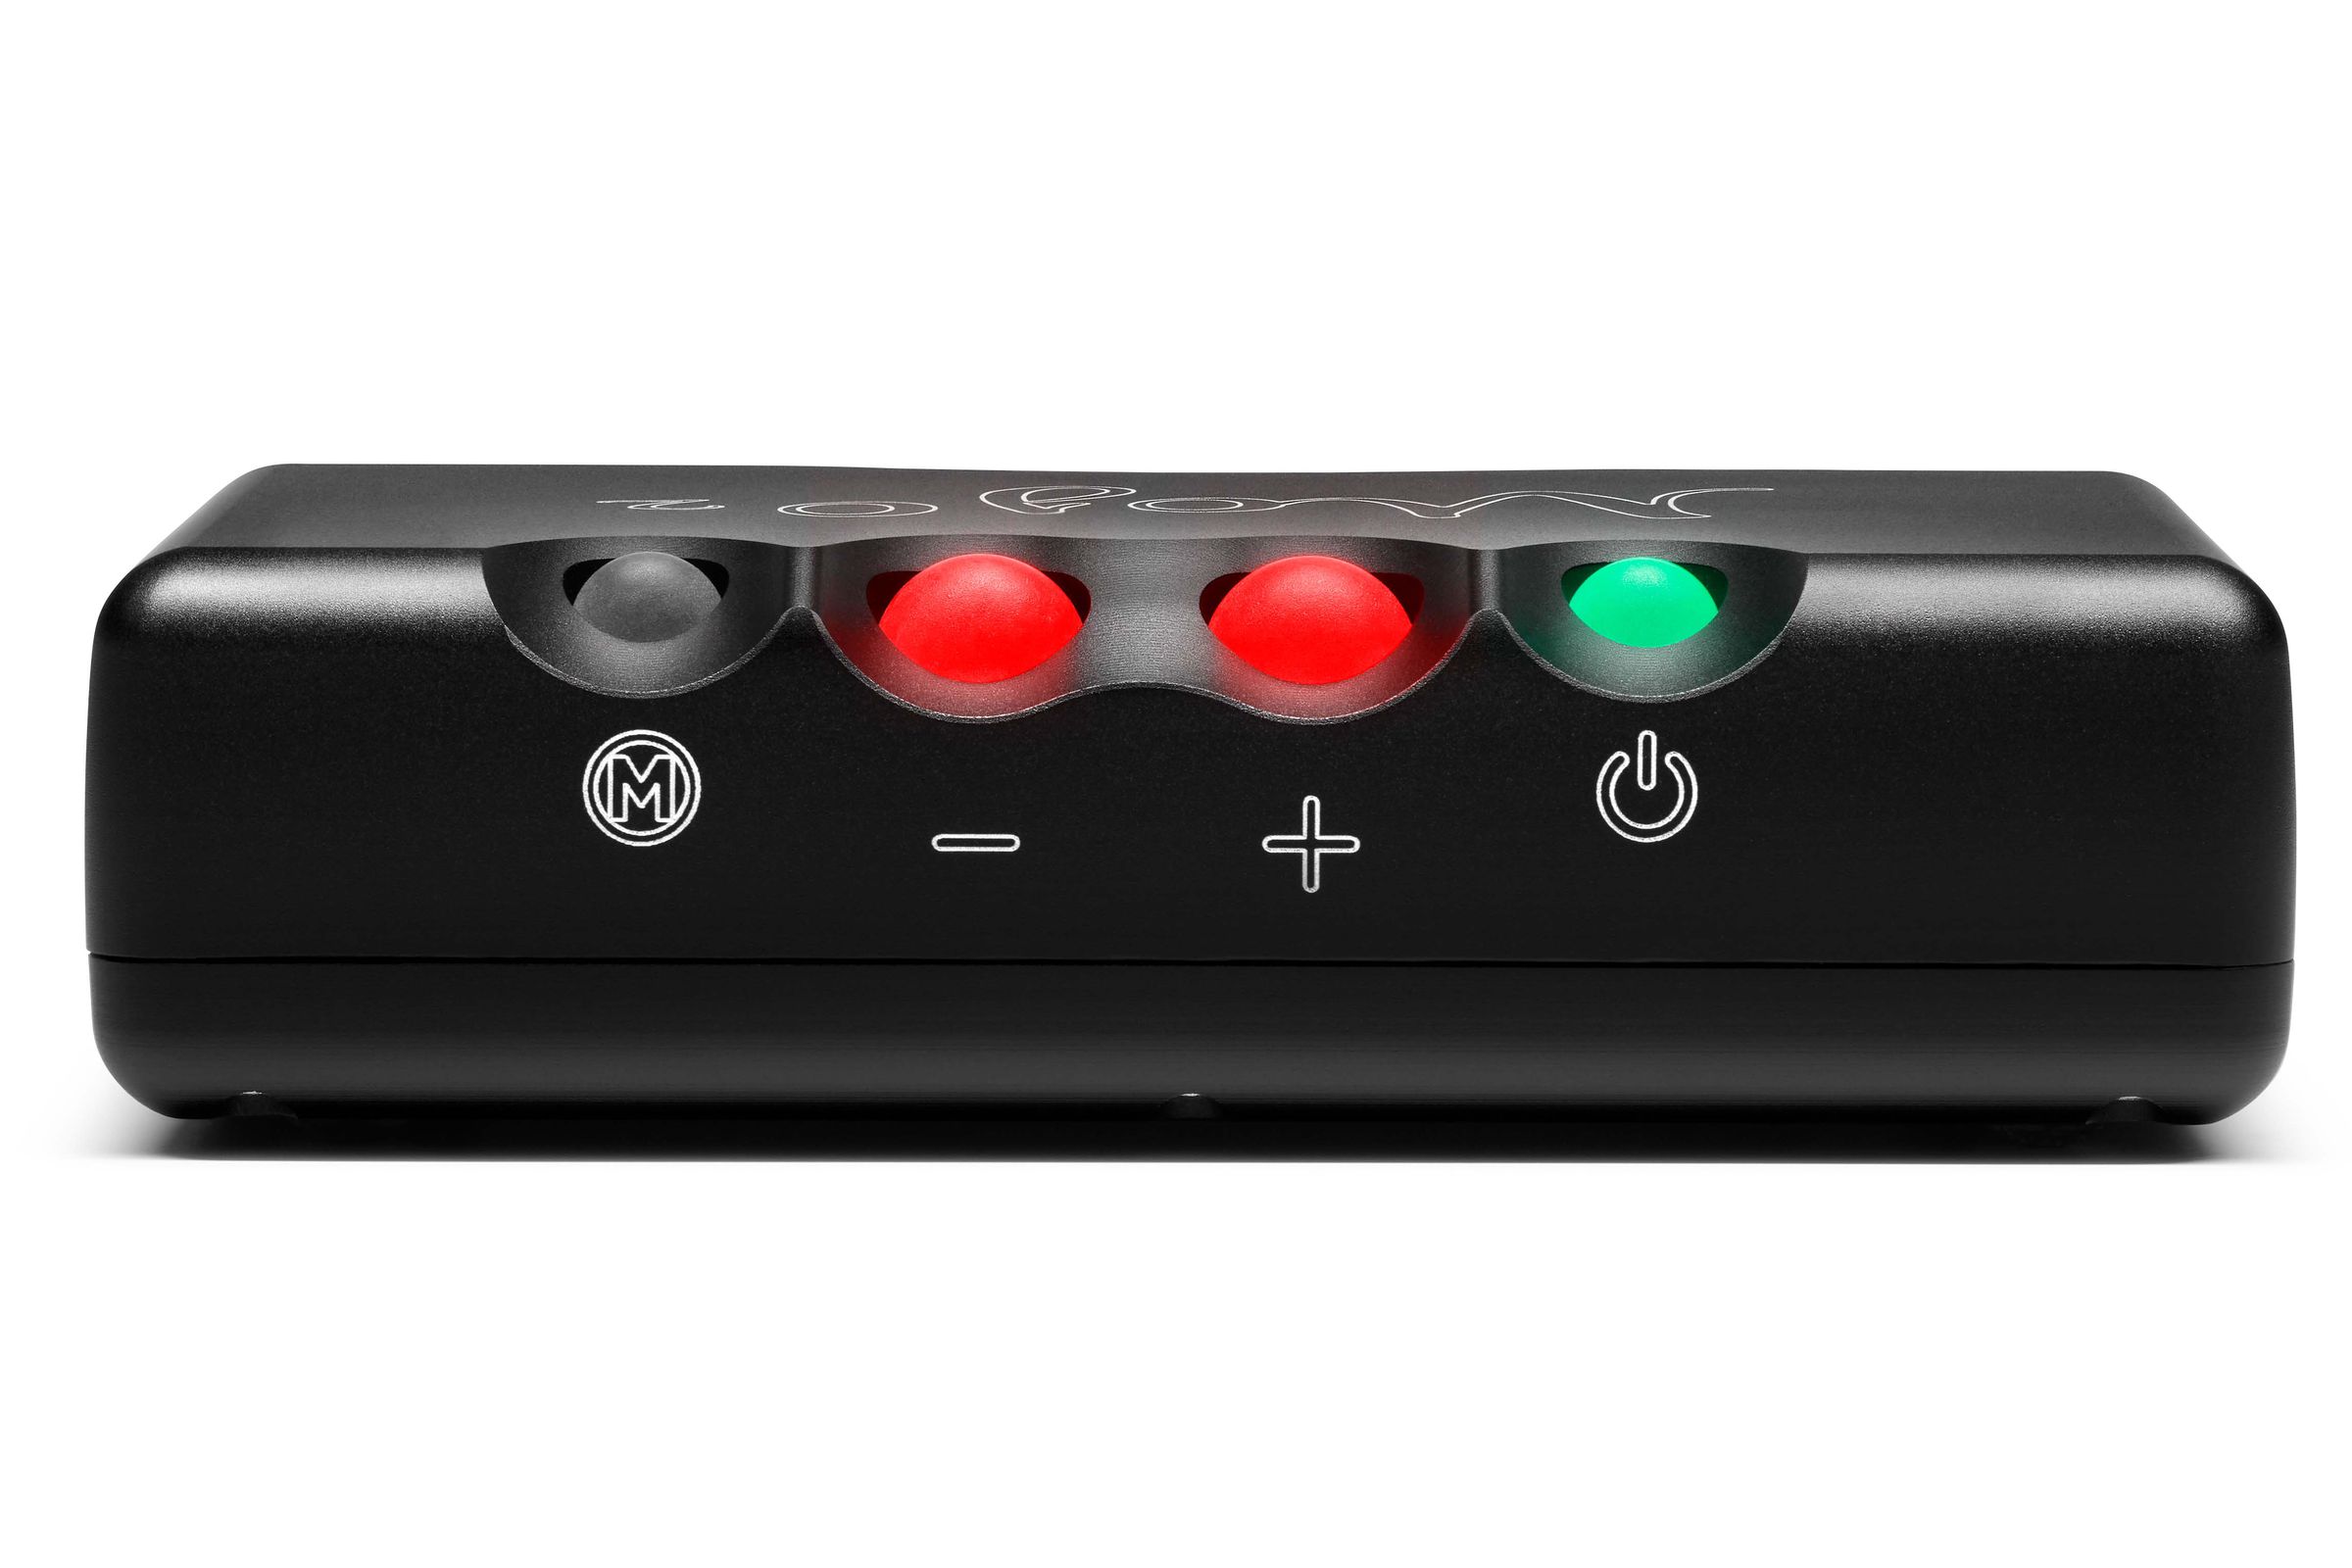 A fourth control button offers new tone controls.